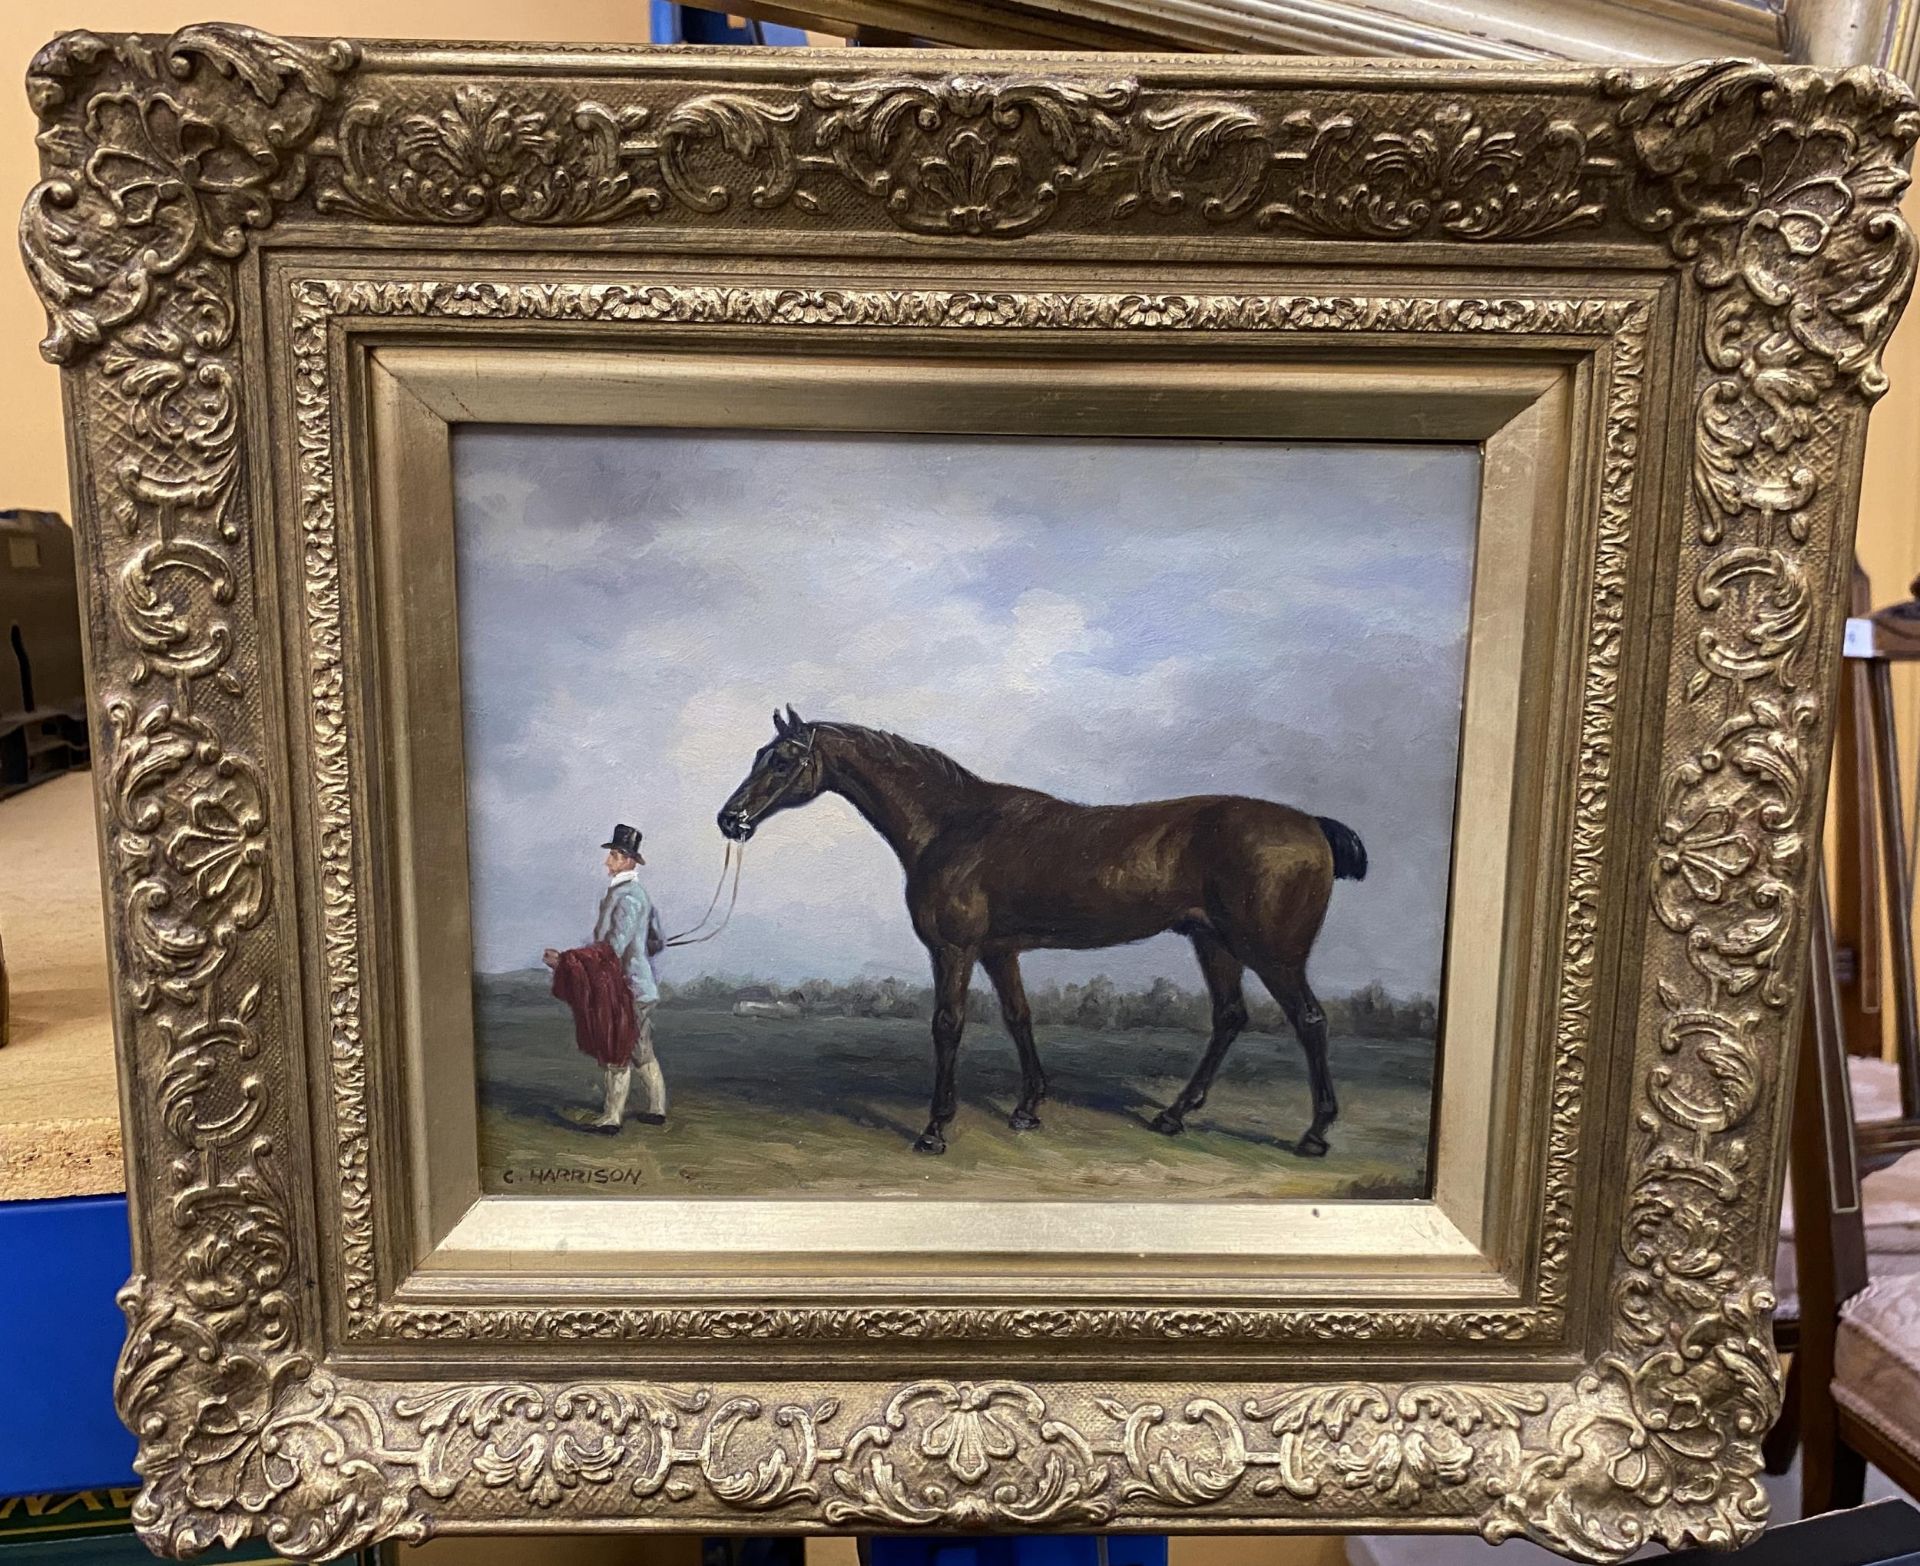 A GILT FRAMED OIL PAINTING OF A RACEHORSE, SIGNED C.HARRISON, 35 X 41CM